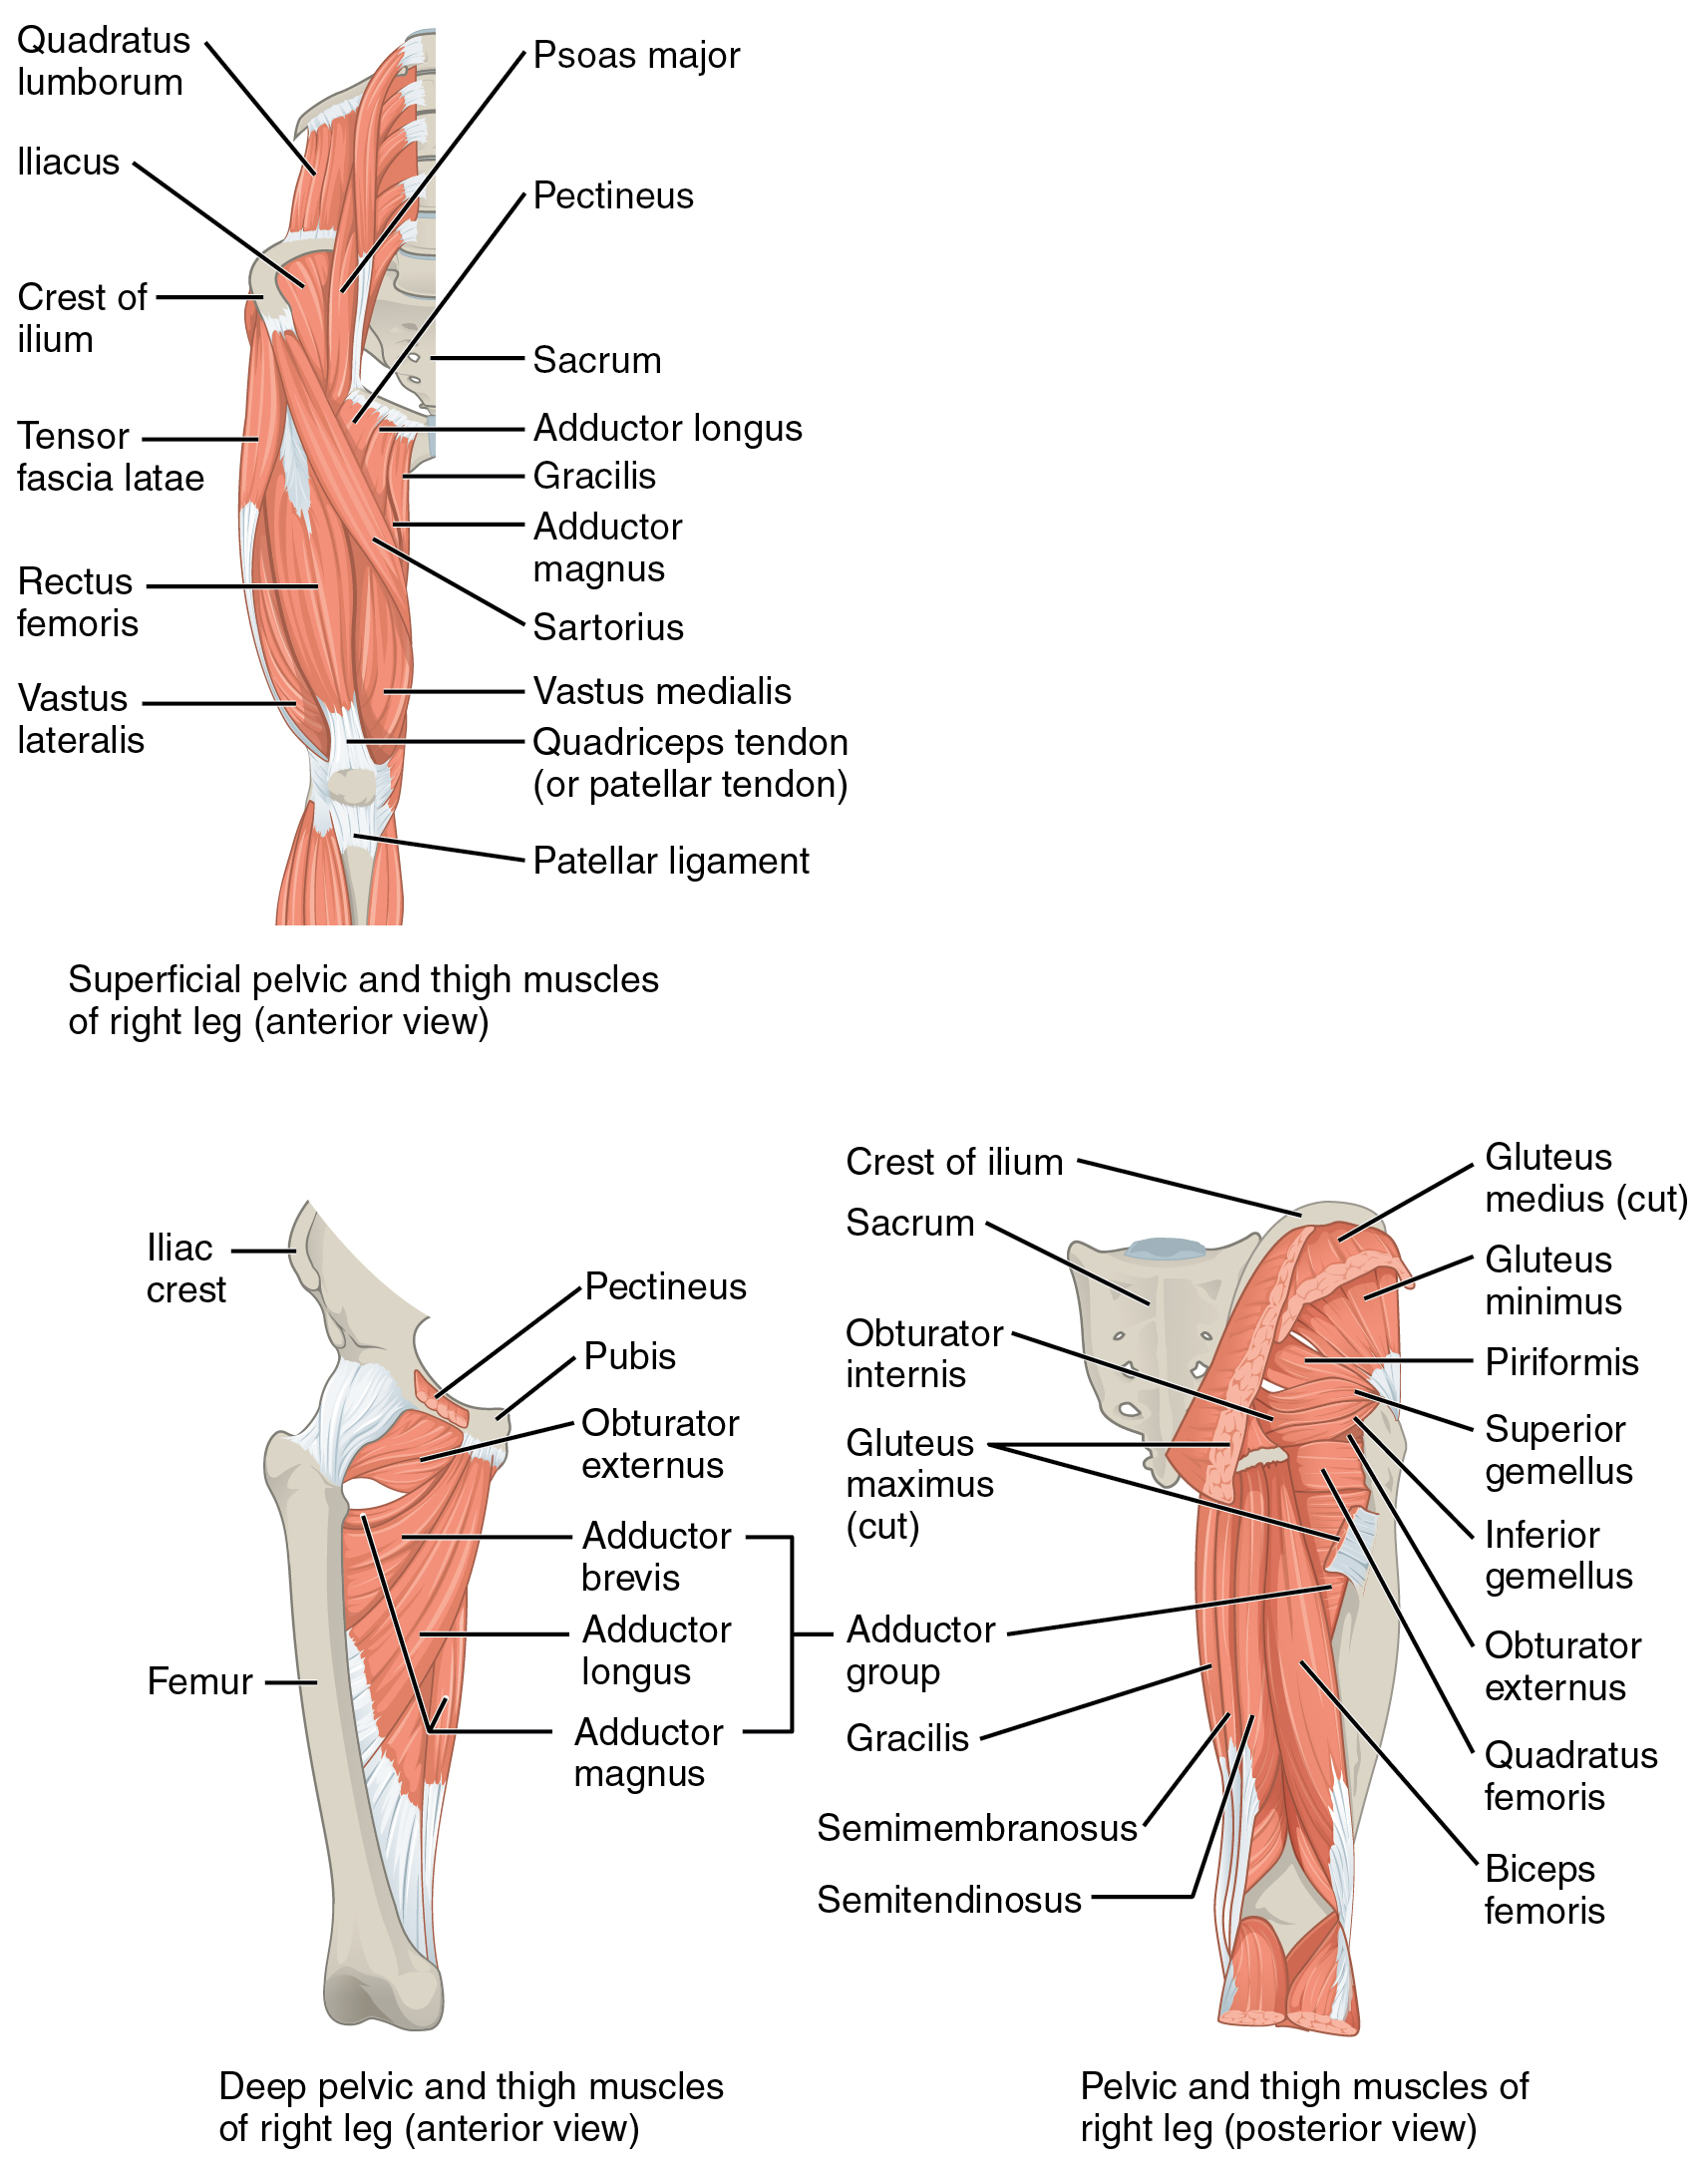 anterior view of the superfical pelvic and thigh muscles of the right leg; anterior view of the deep pelvic and thigh muscles of the right leg; posterior view of the pelvic and thigh muscles of the right leg